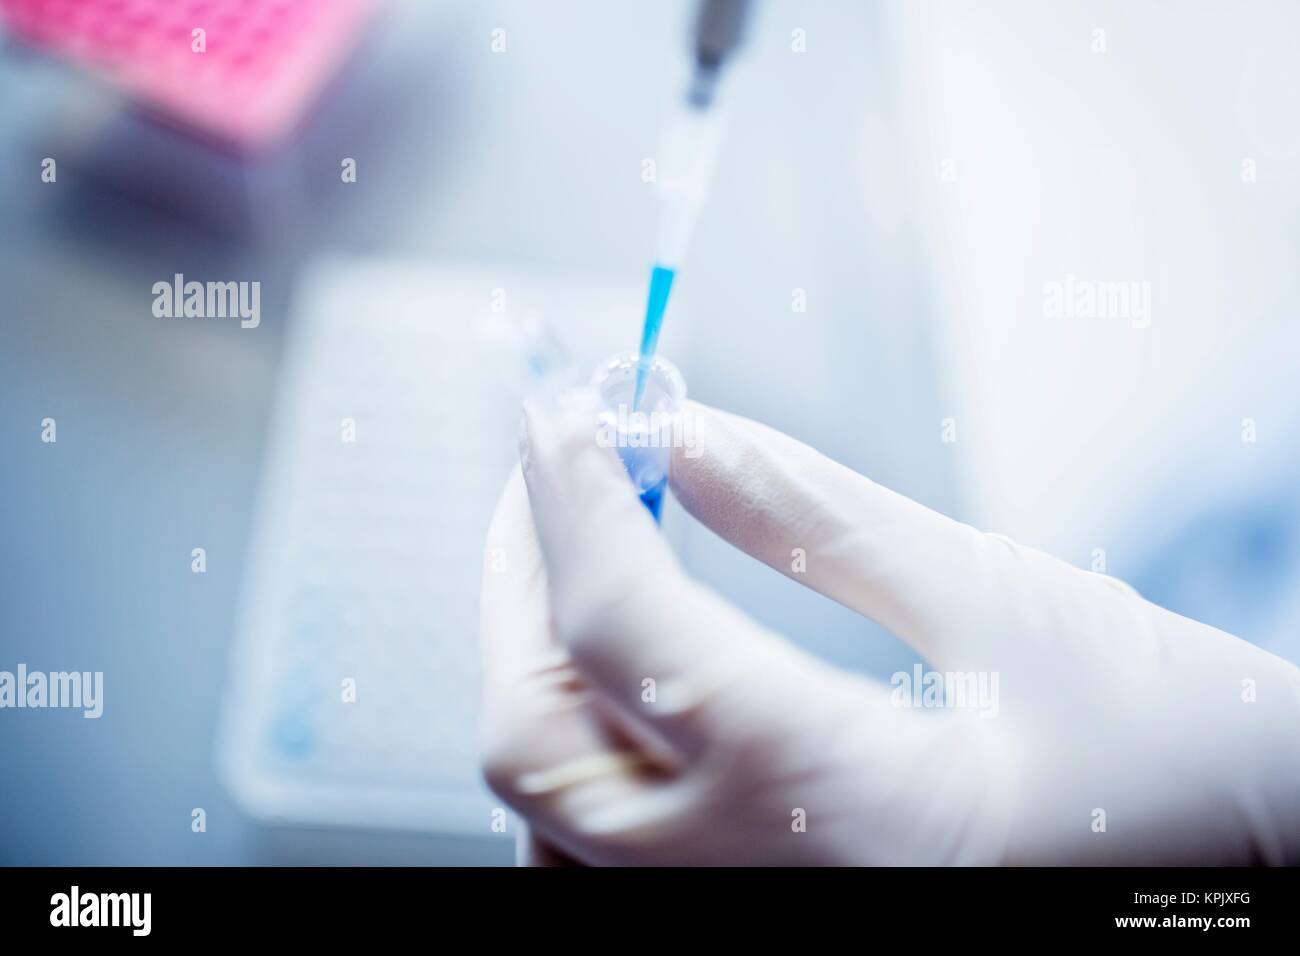 Scientist using pipette, close up. Stock Photo